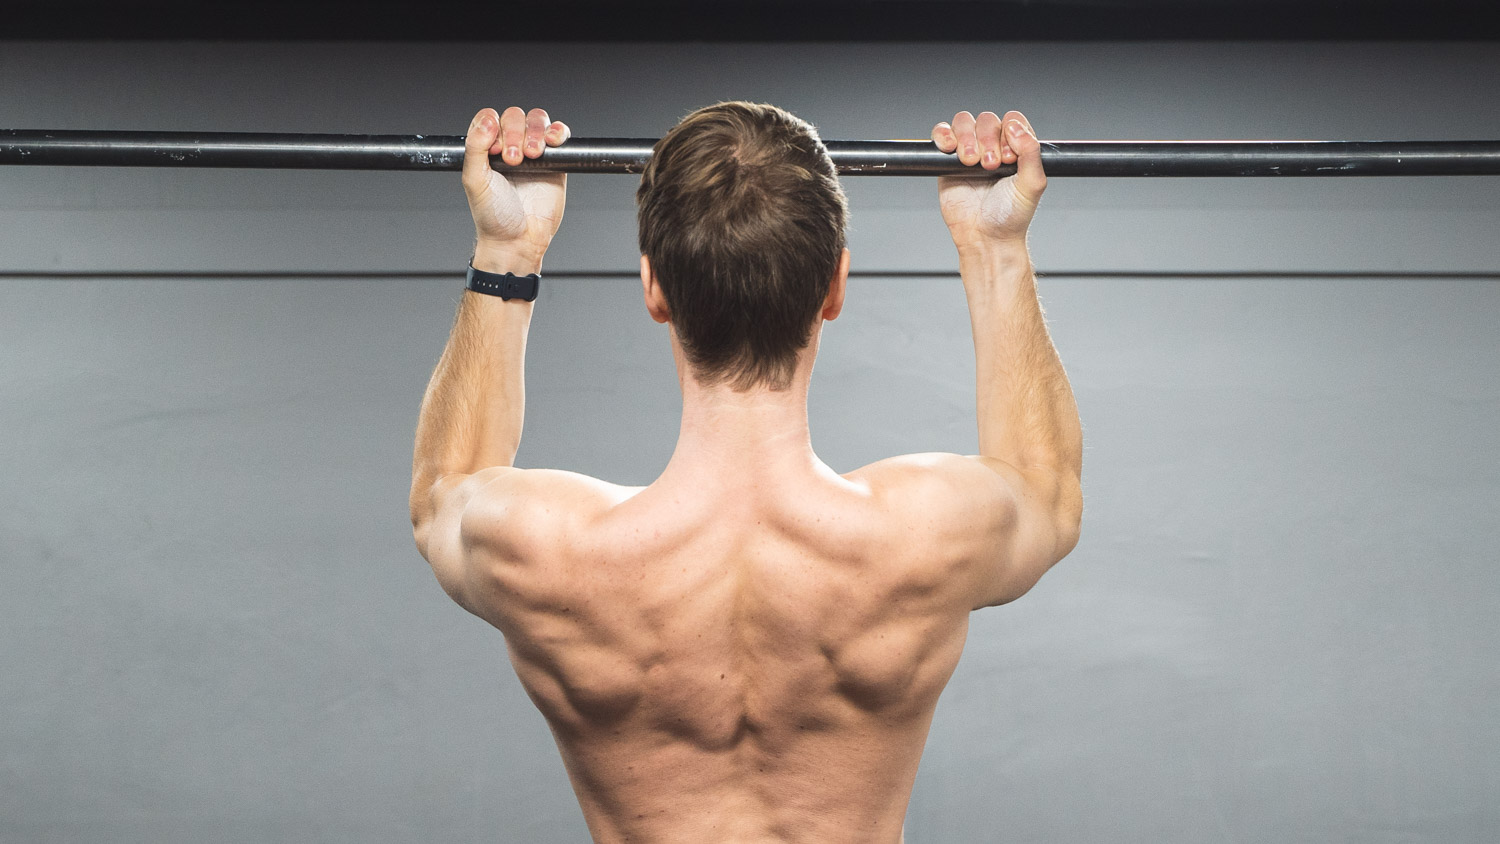 Strict Pull Ups - And a Proper Push Up Too